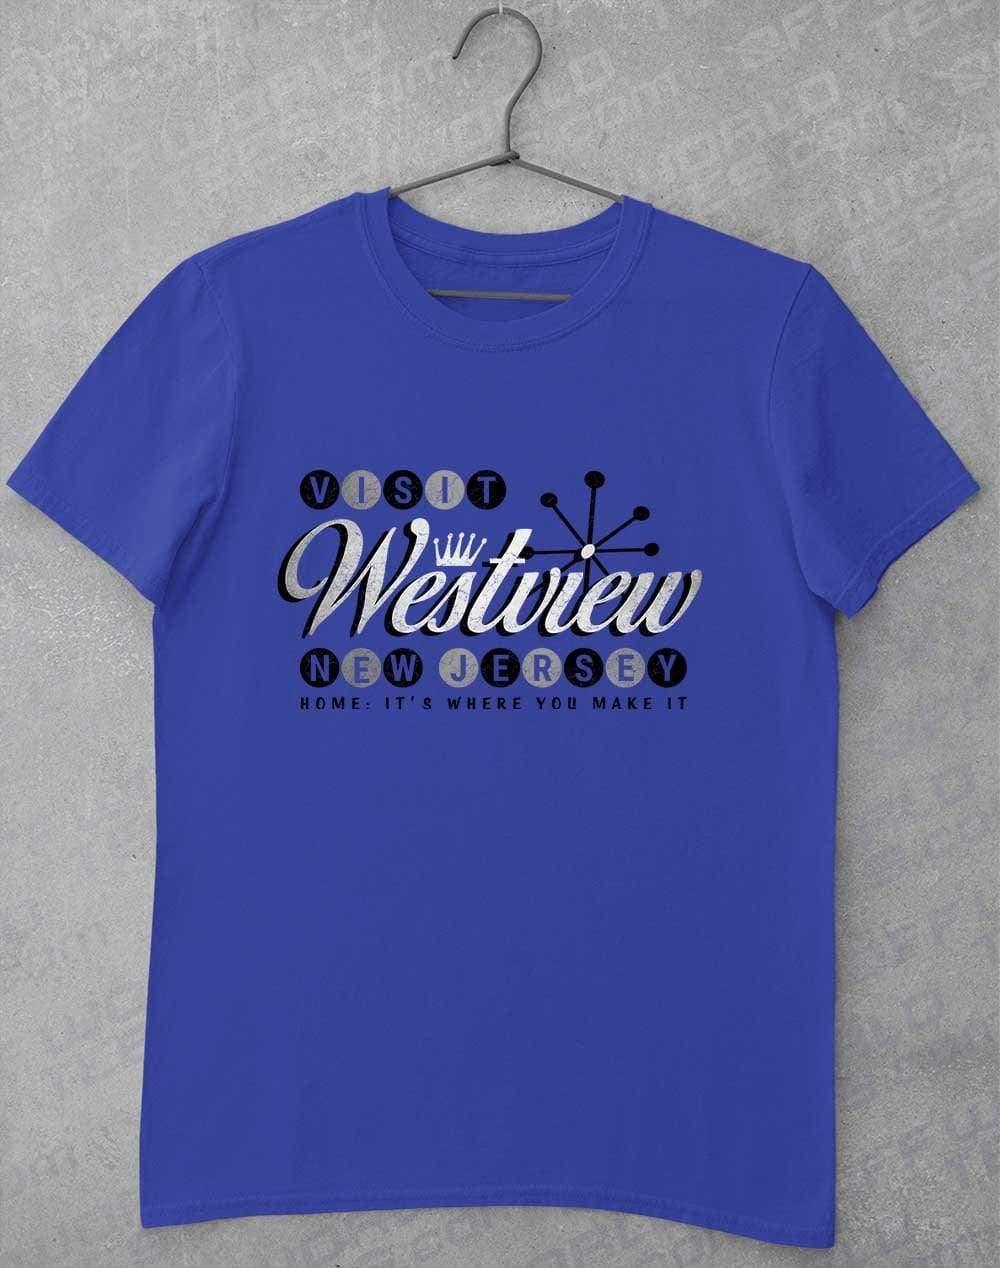 Visit Westview New Jersey T-Shirt S / Royal  - Off World Tees